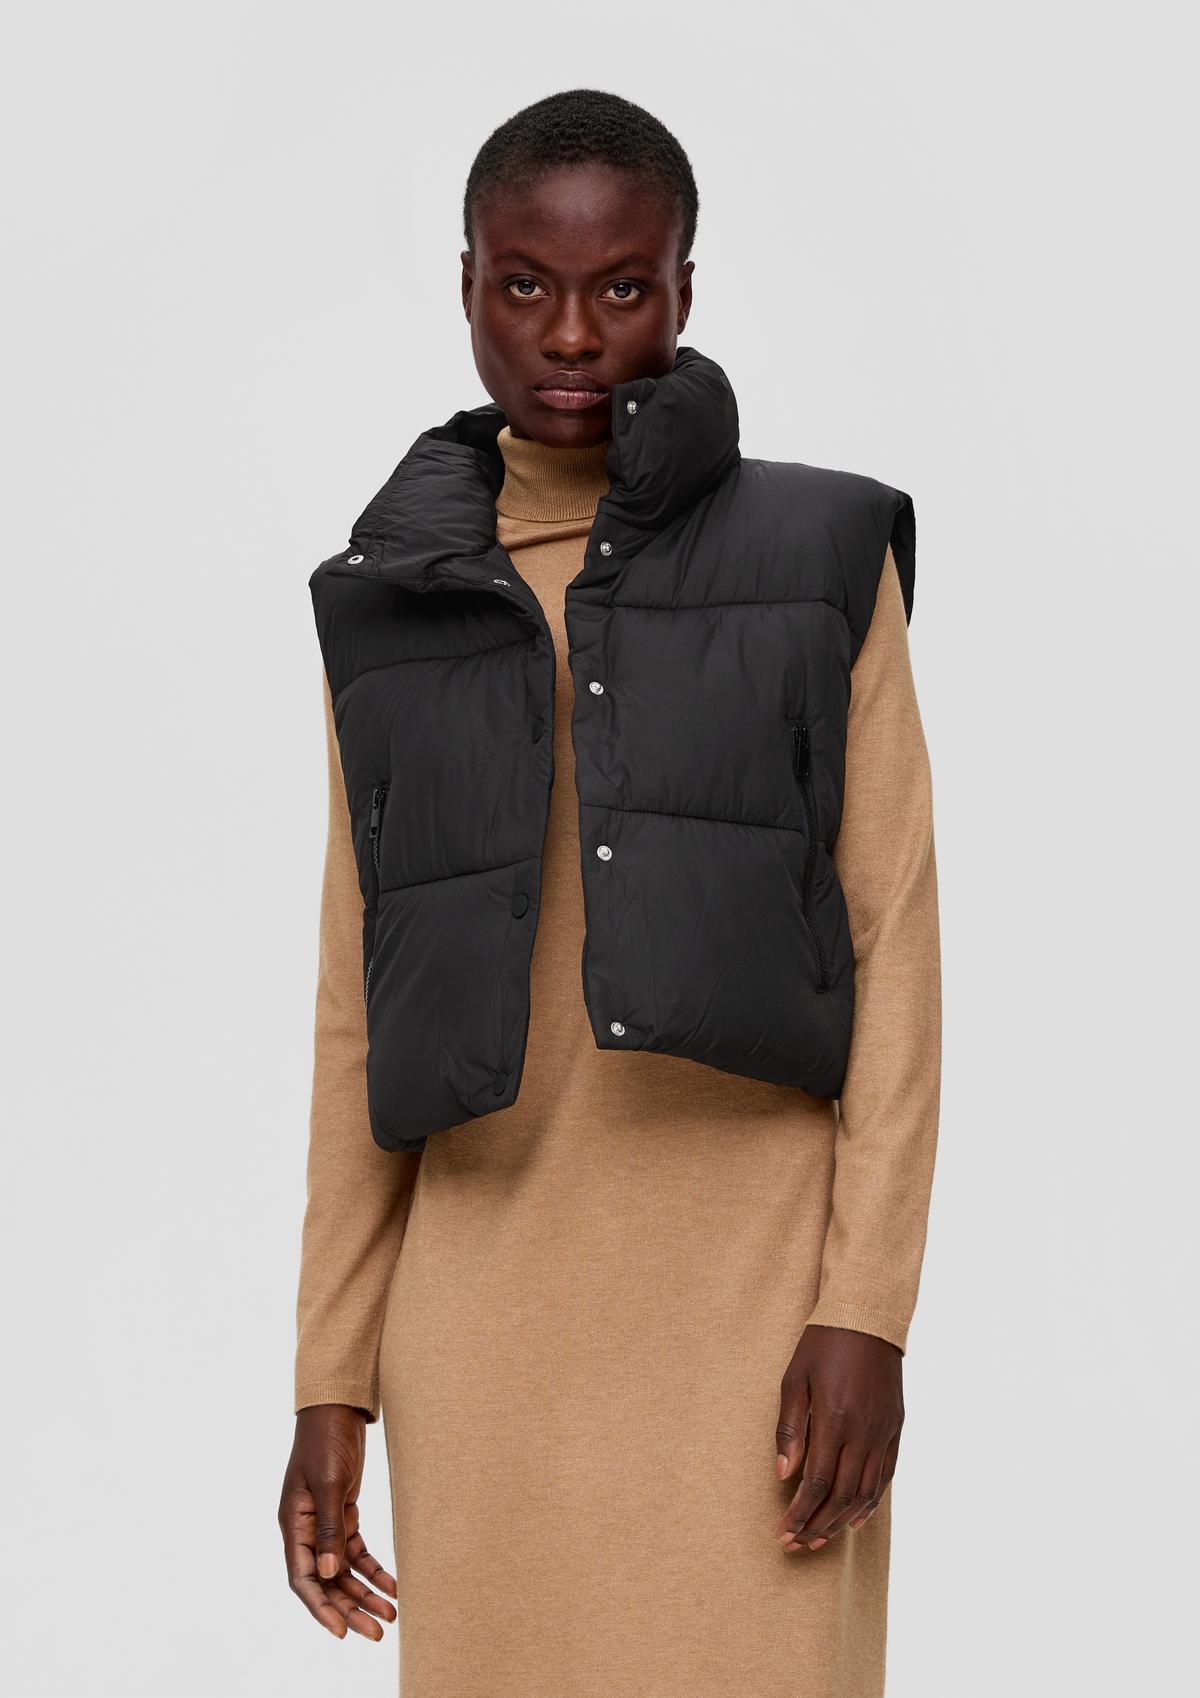 Padded quilted body warmer with a stand-up collar